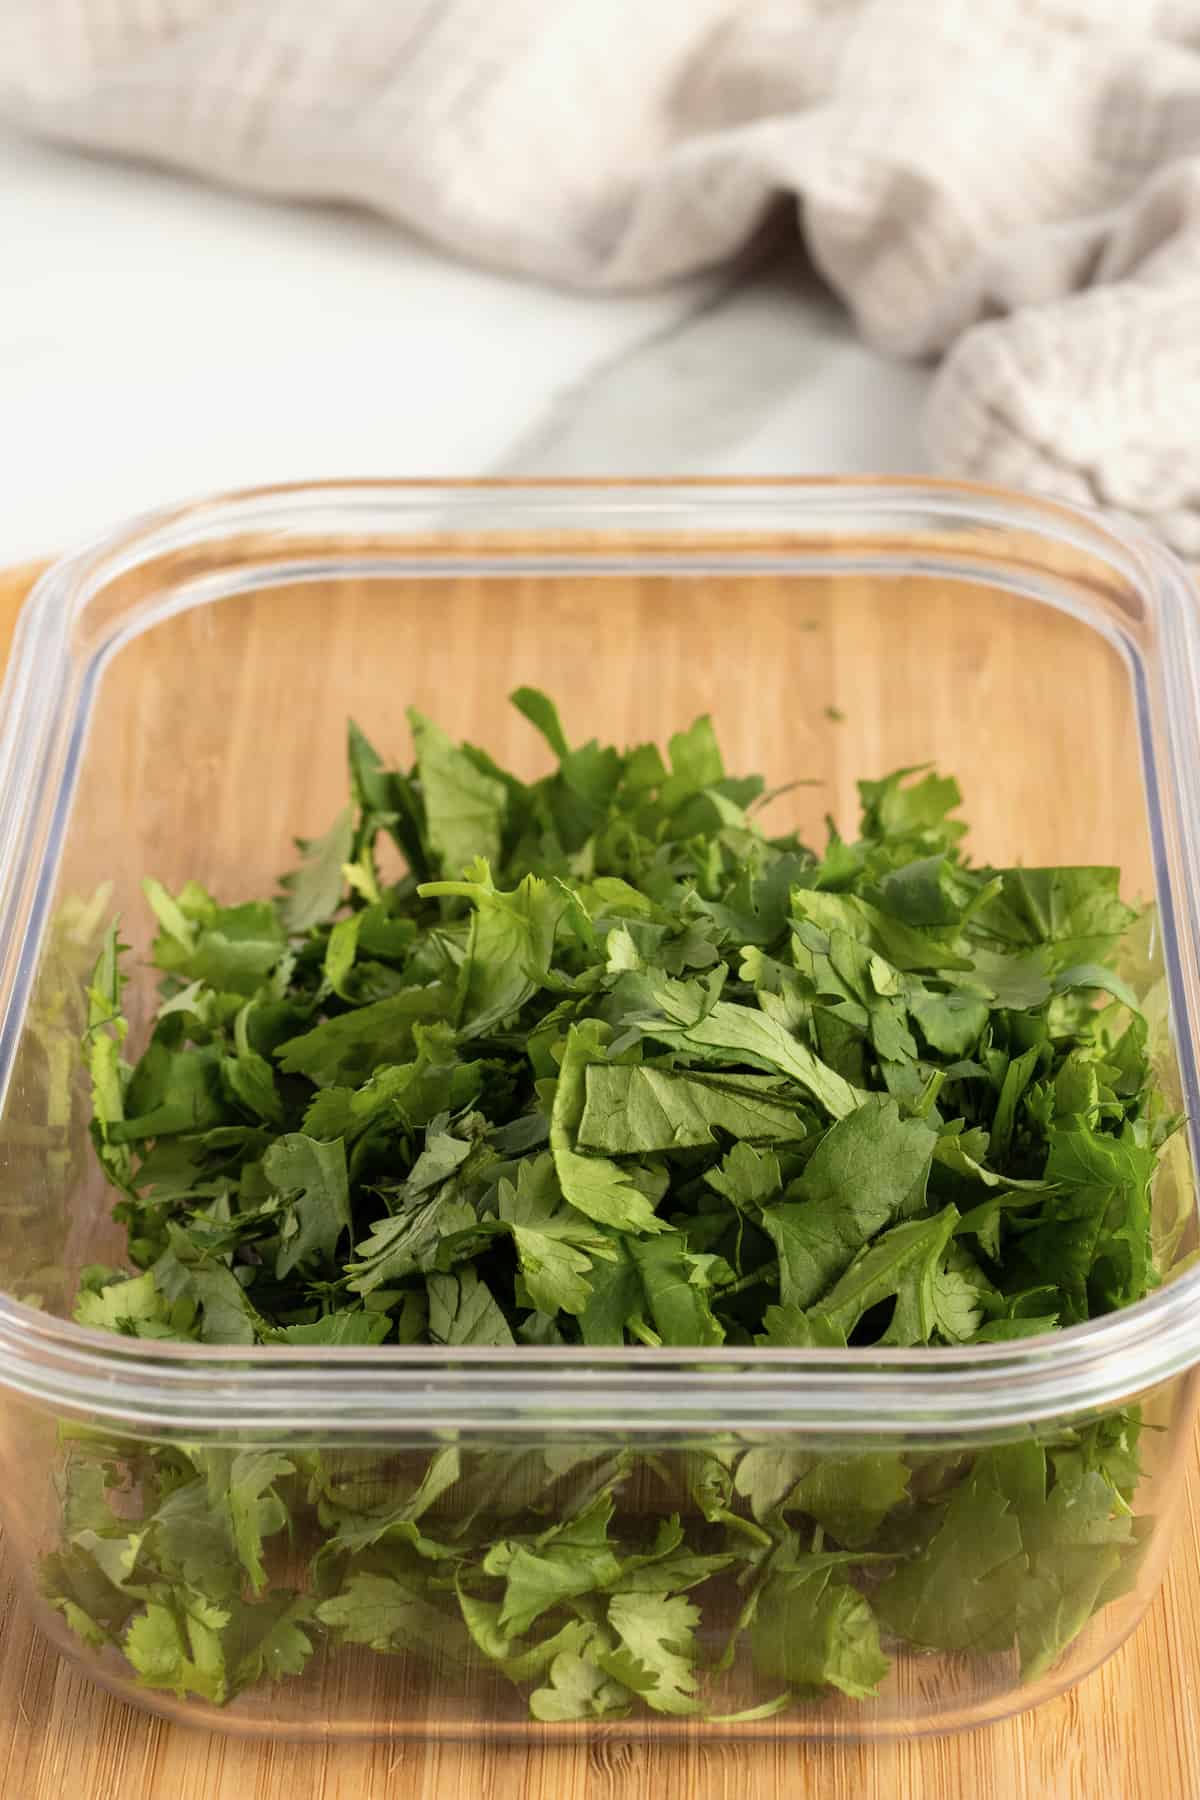 How to Wash Cilantro by The BakerMama